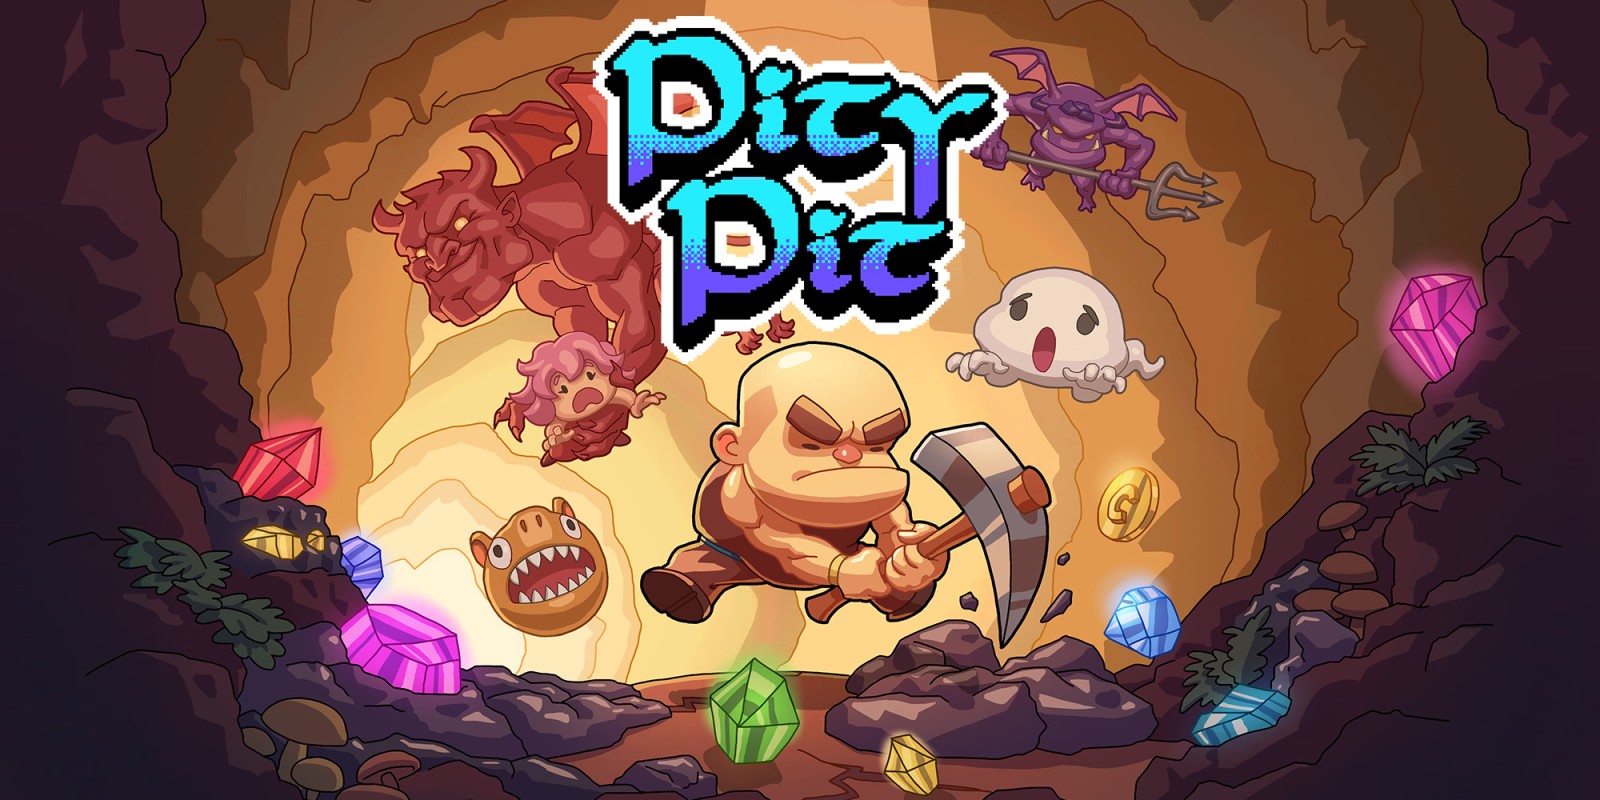 download pit people switch